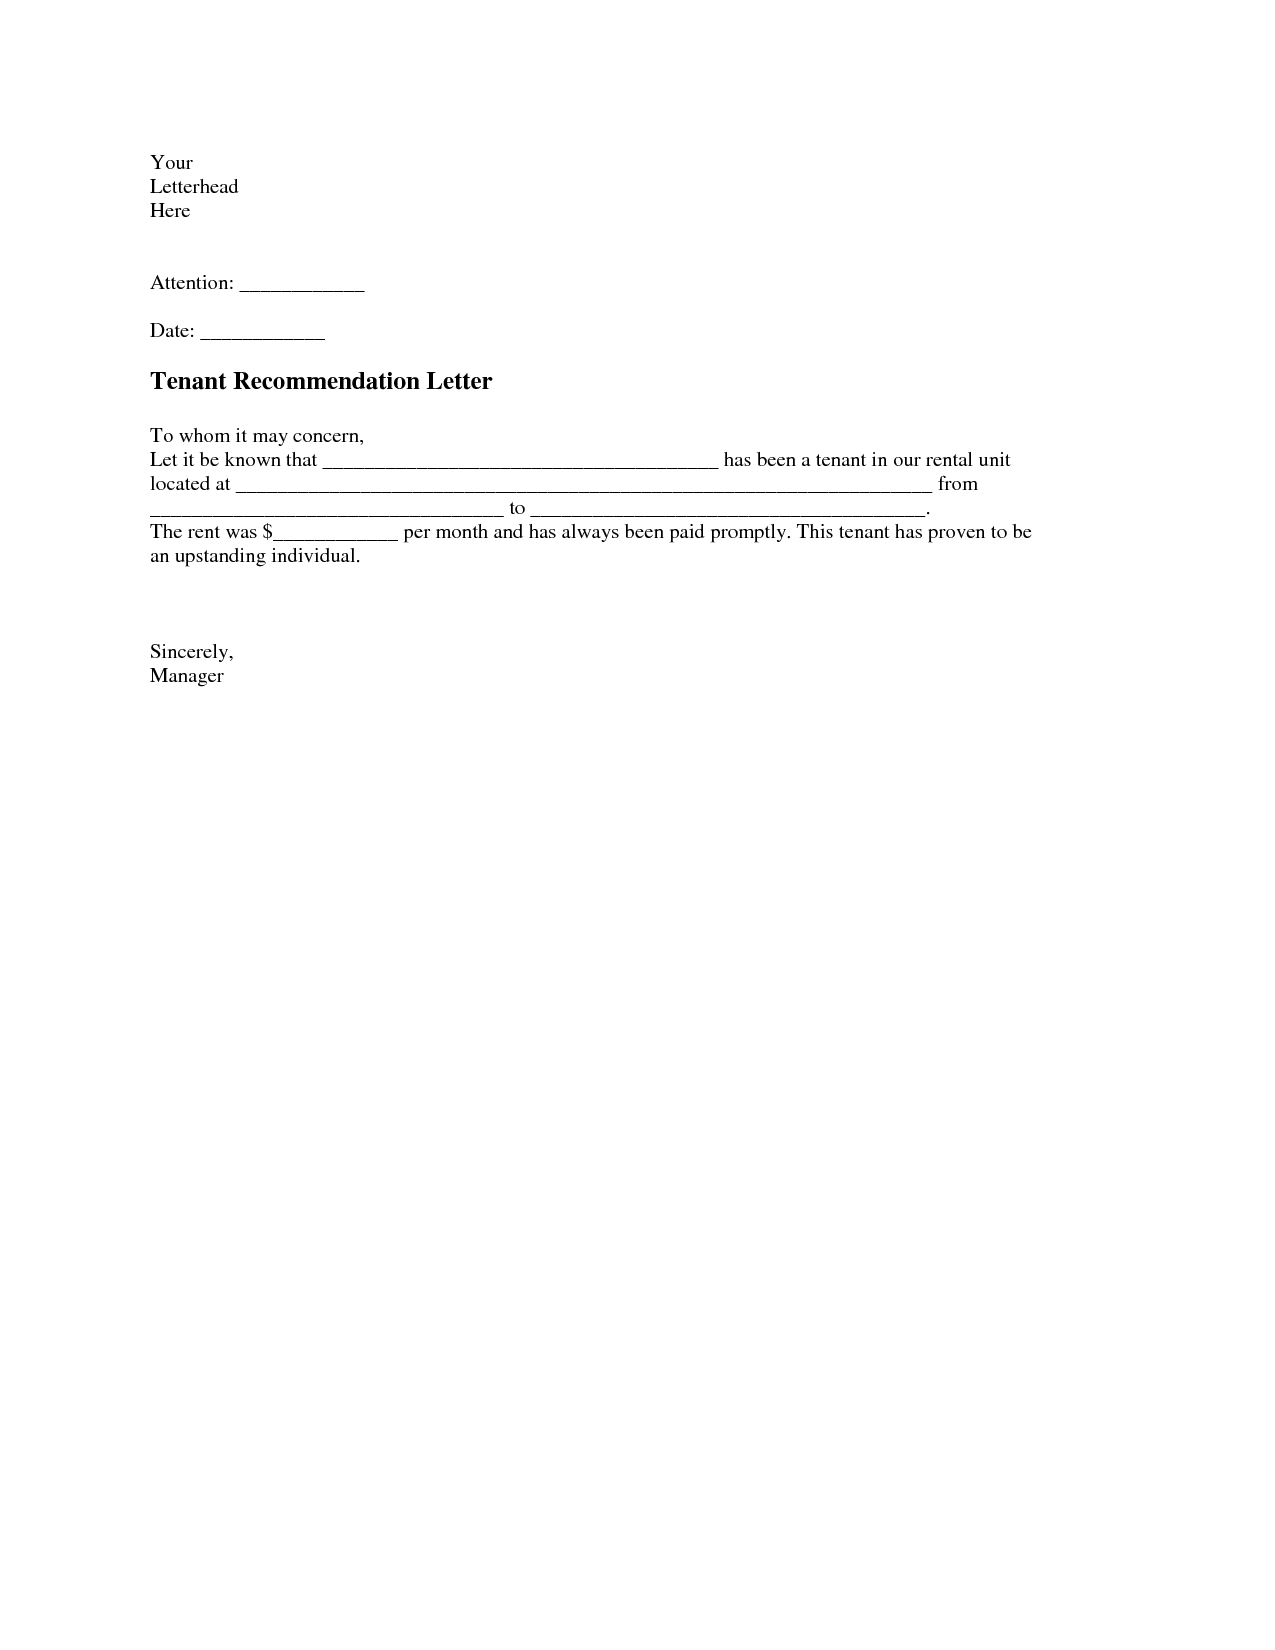 Tenant Recommendation Letter A Tenant Recommendation intended for size 1275 X 1650